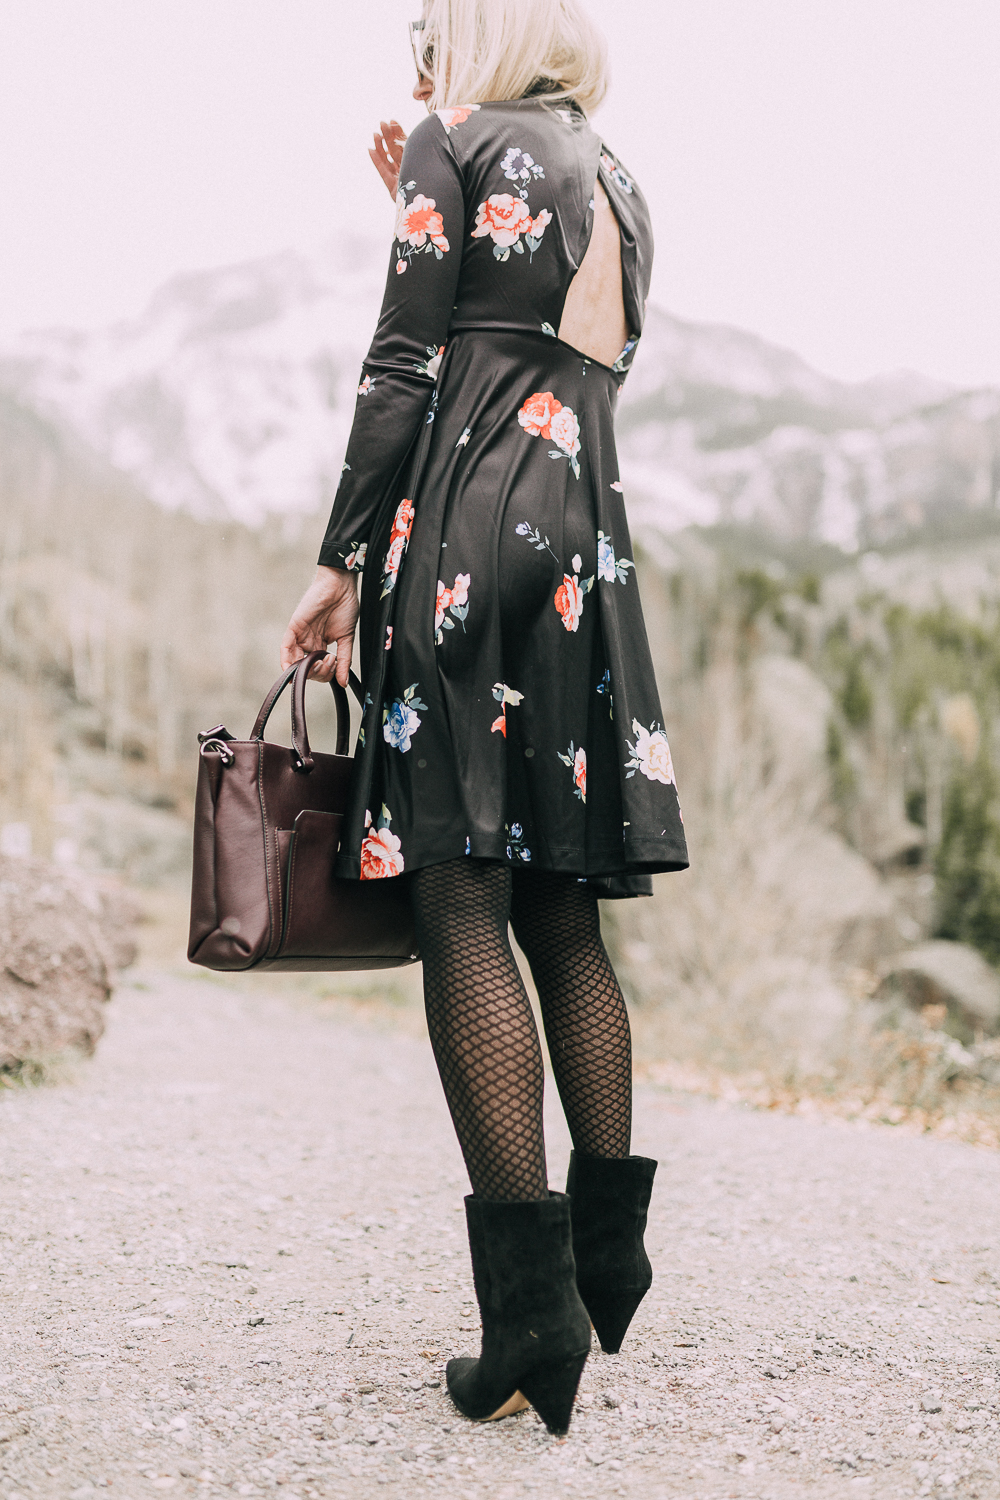 back of woman wearing regina black suede Booties by Vince Camuto paired with black open-back floral print dress and burgundy tote bag